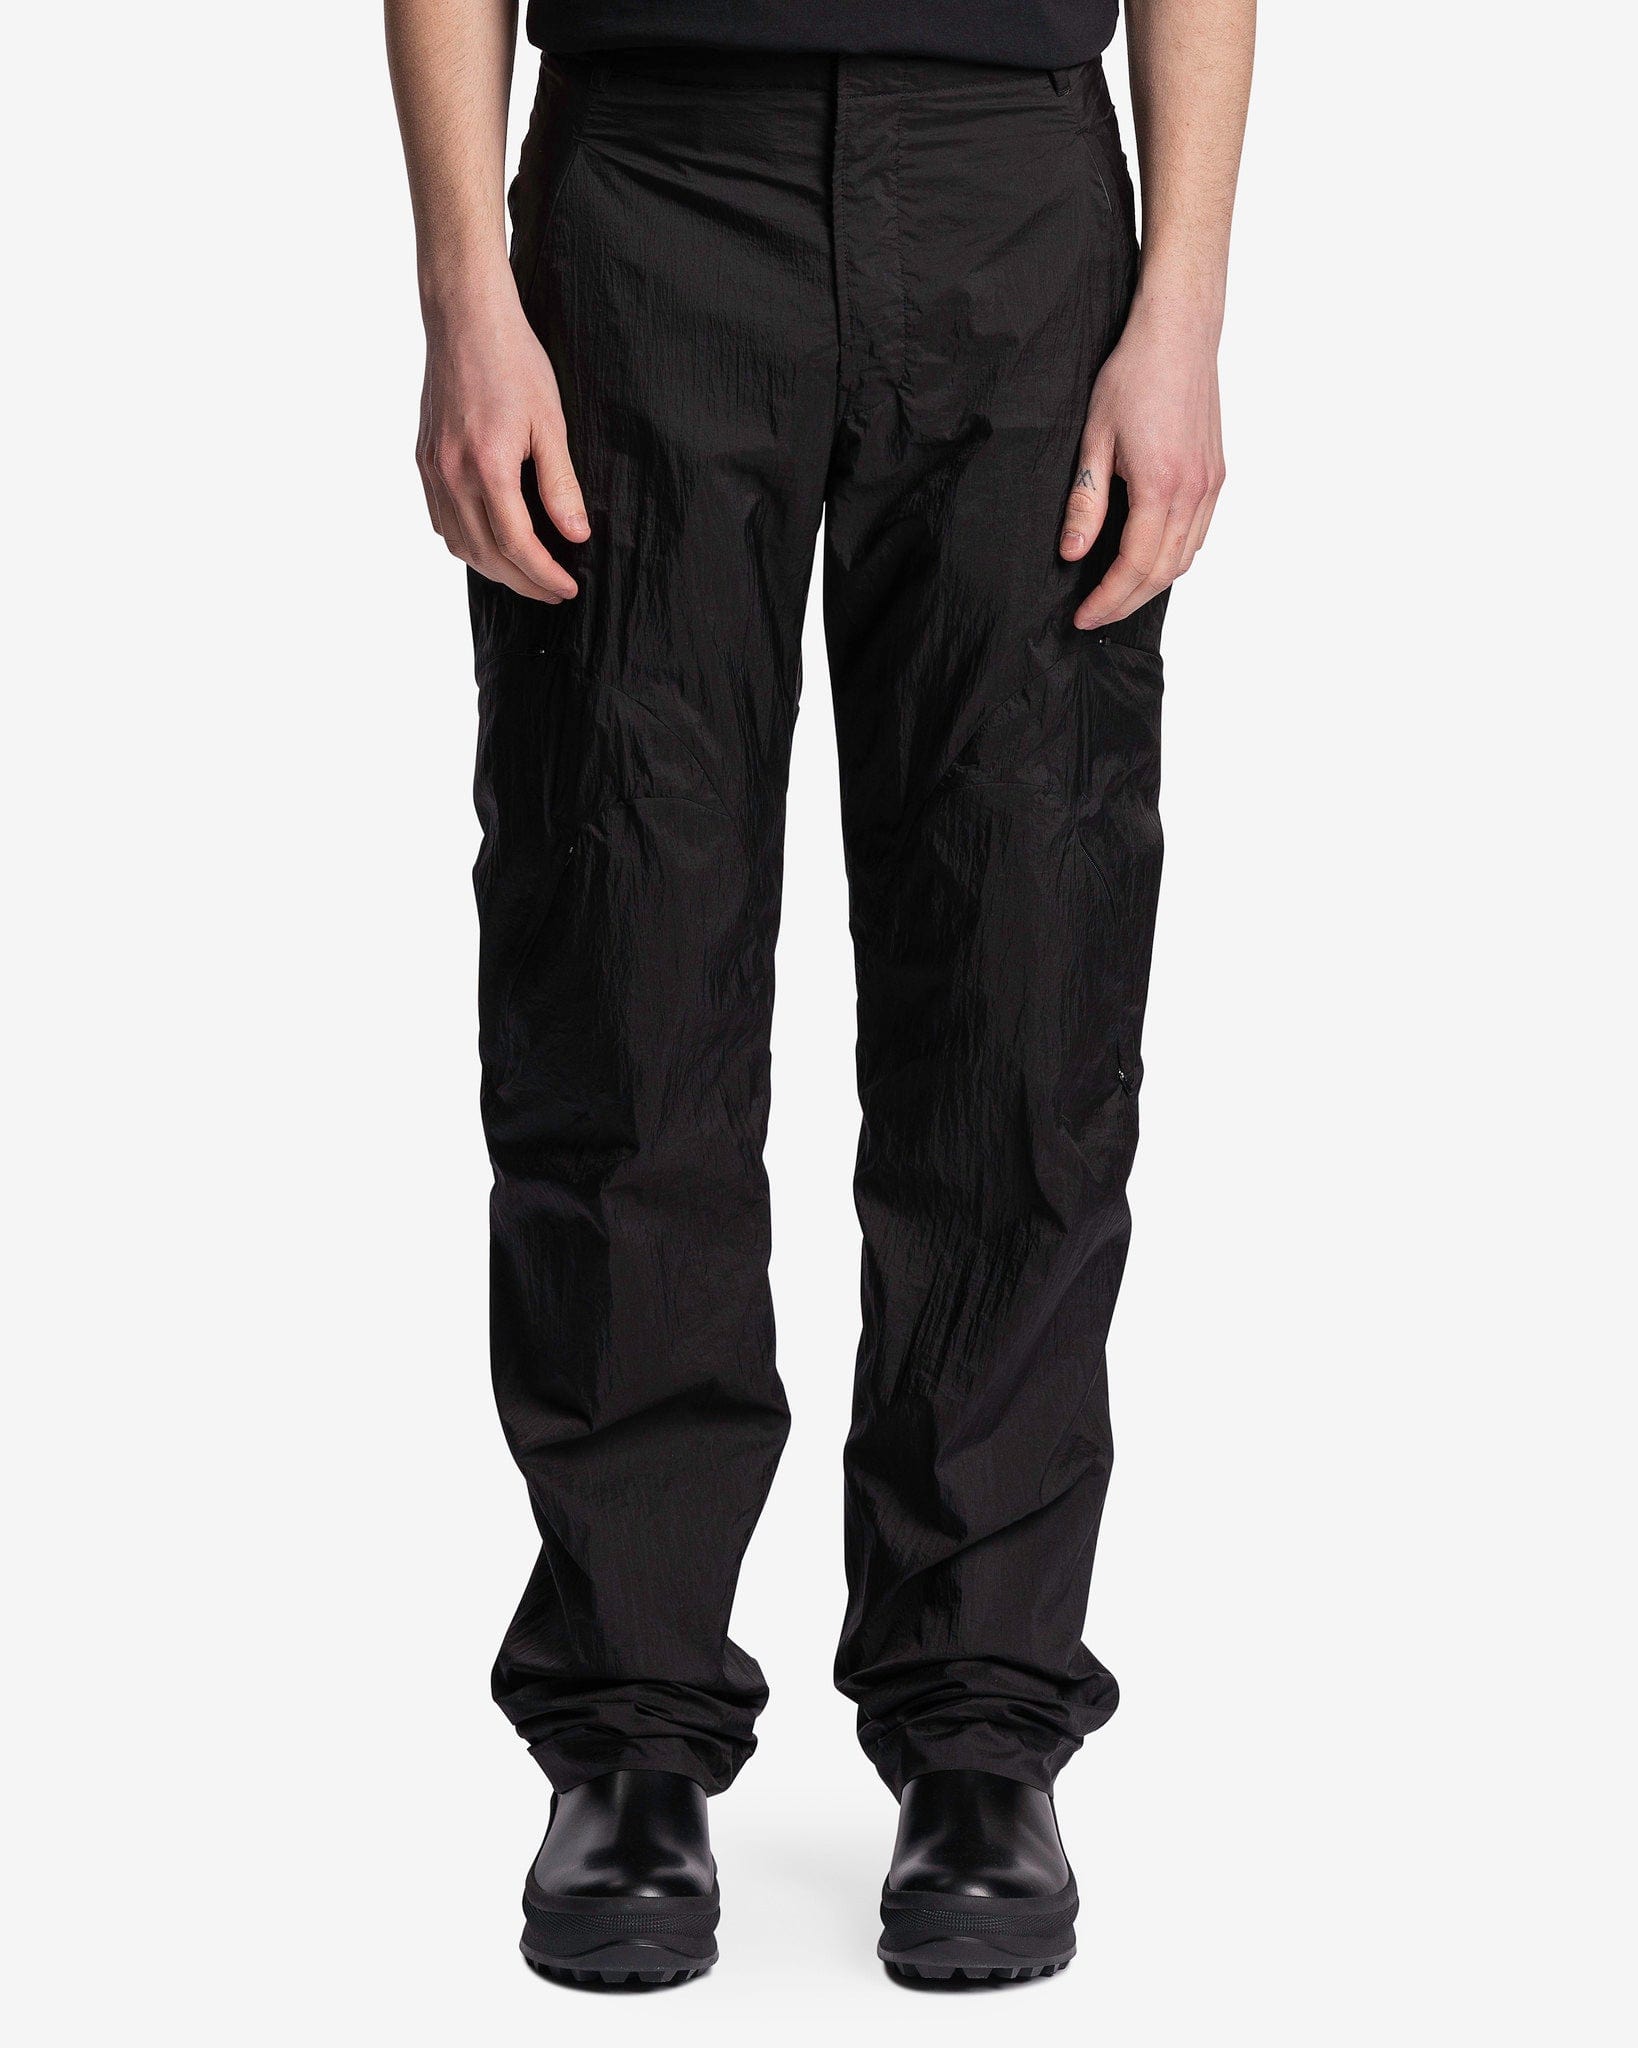 POST ARCHIVE FACTION (P.A.F) Men's Pants 5.0+ Trousers Center in Black/Charcoal